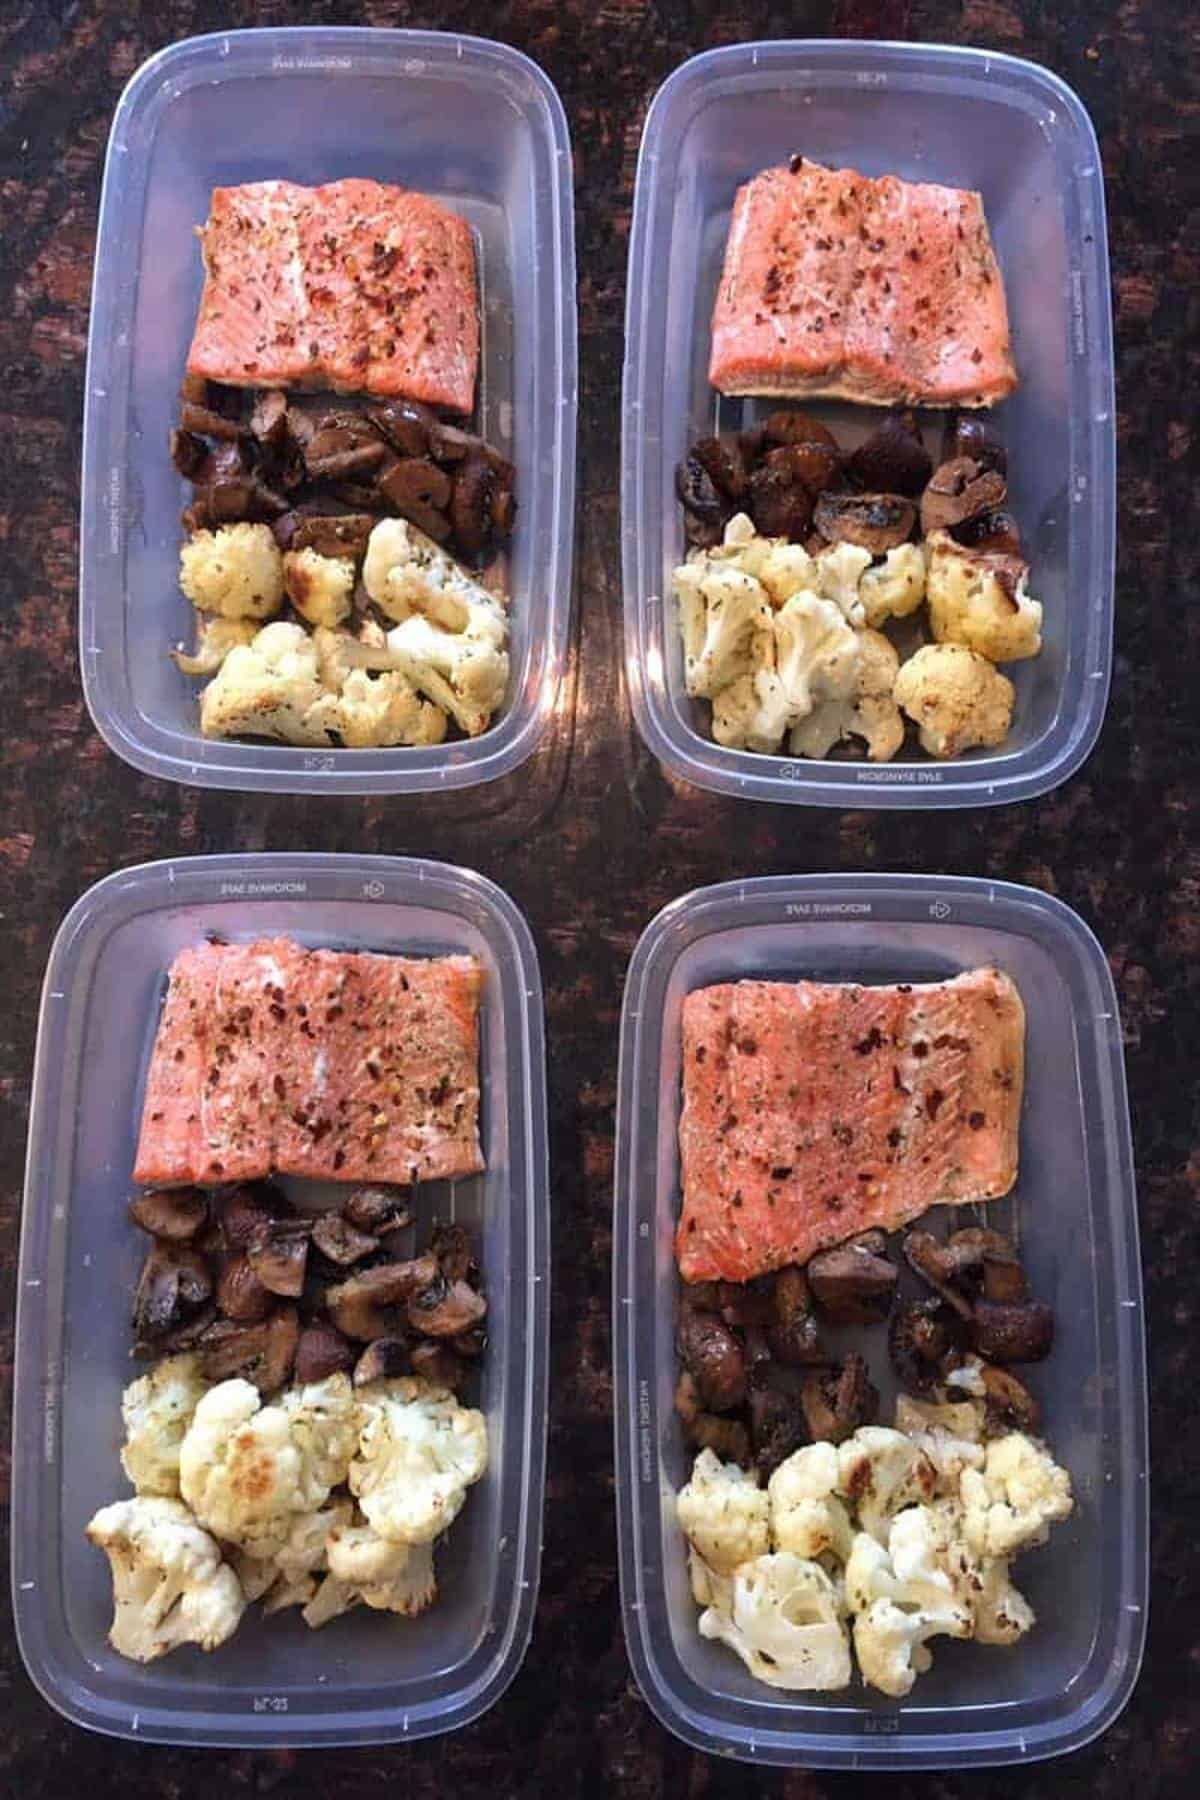 Salmon and veggies in meal containers. 